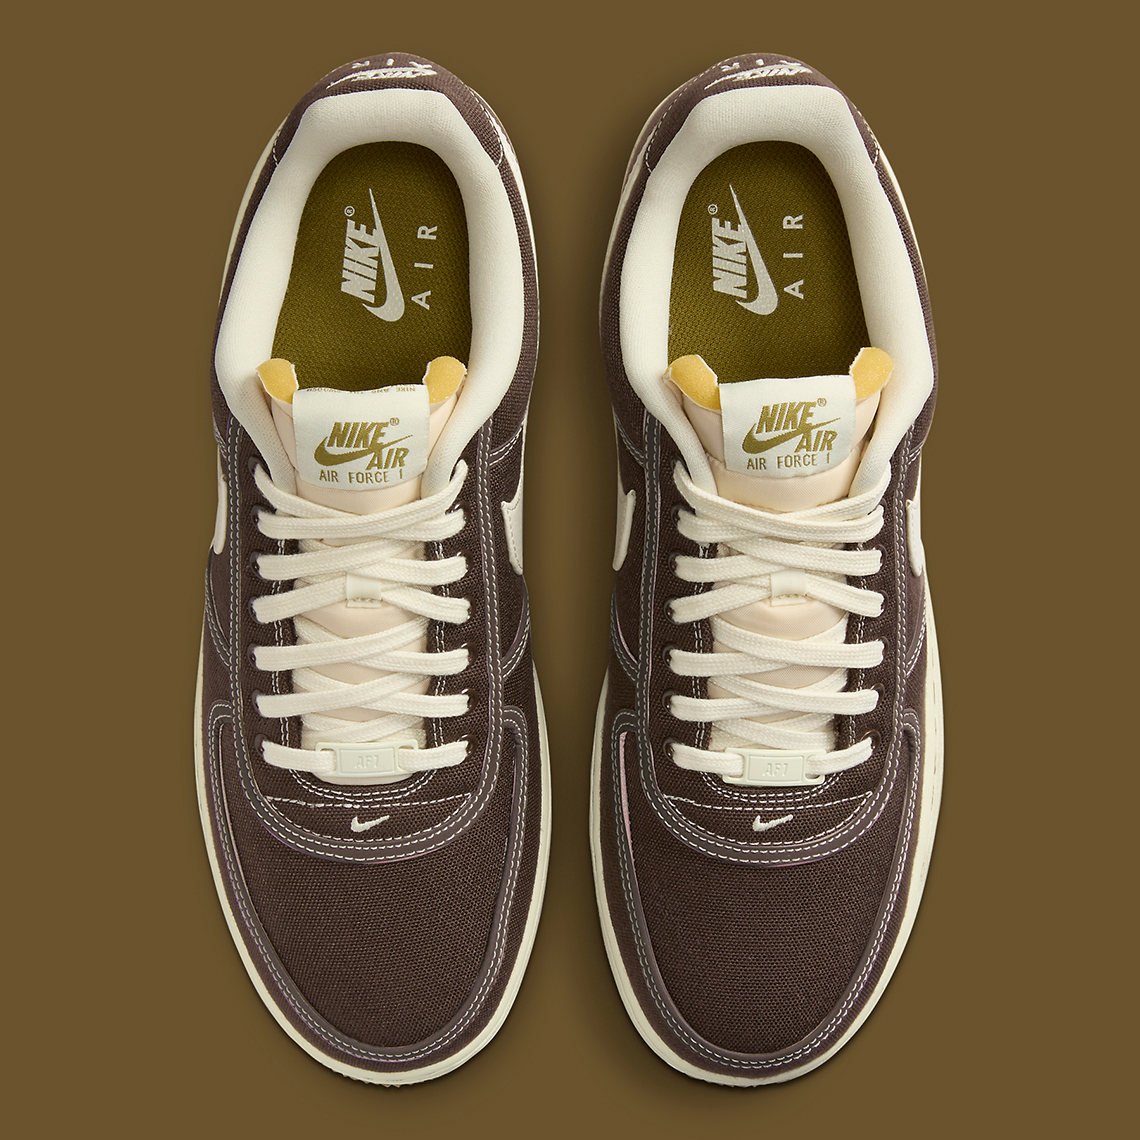 Nike "Dress Dunk" Packaging Low Inside Out Baroque Brown Ci9349 201 2